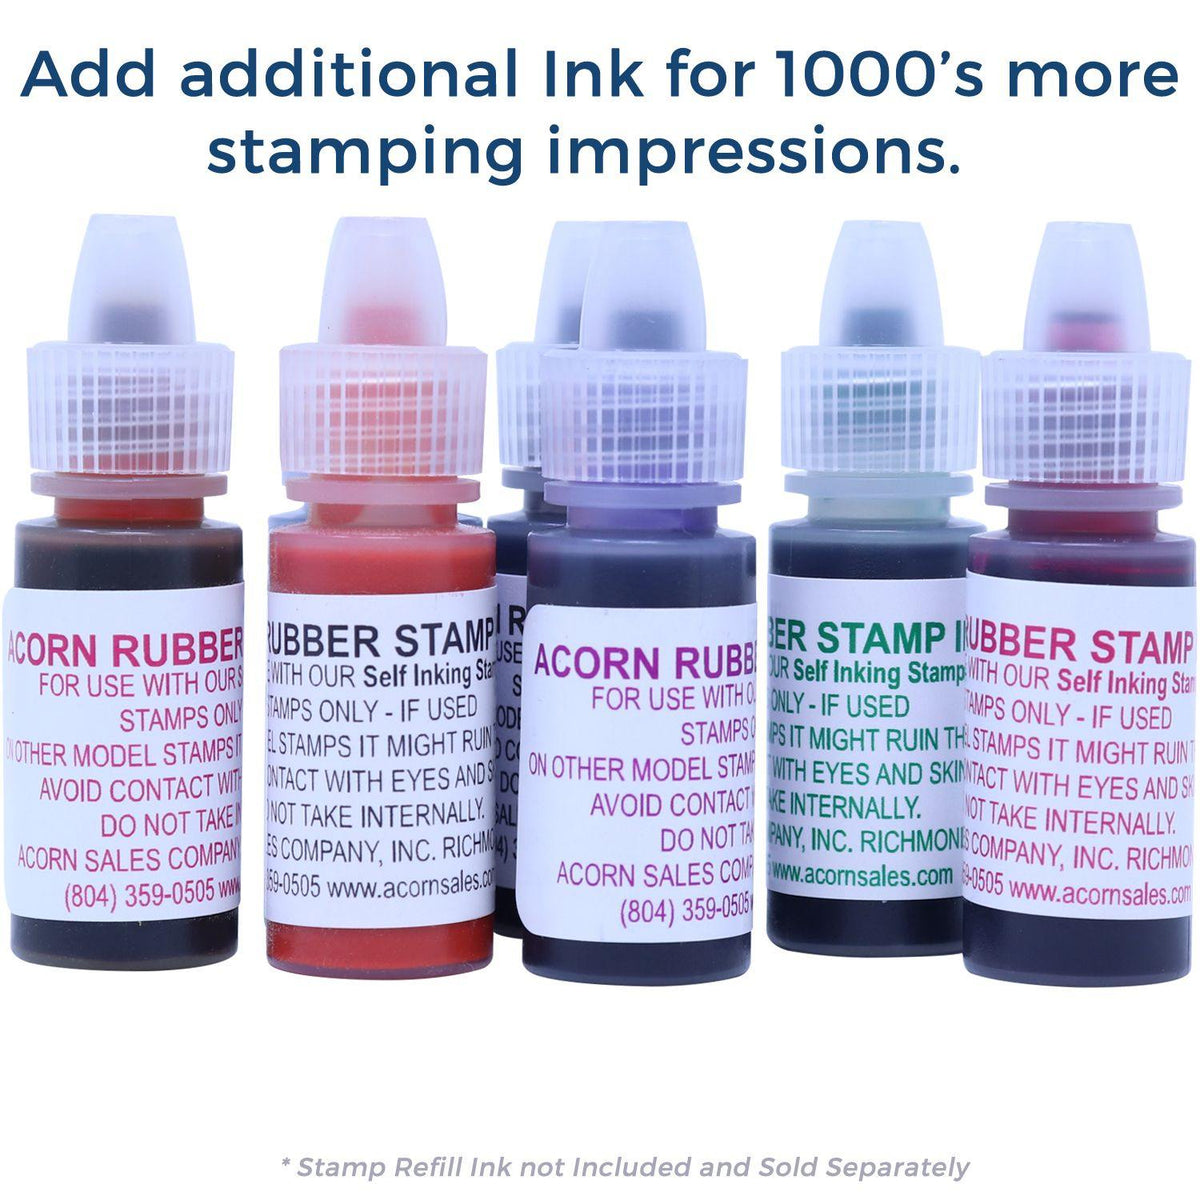 Refill Inks for Large Pre-Inked Express Mail International Stamp Available